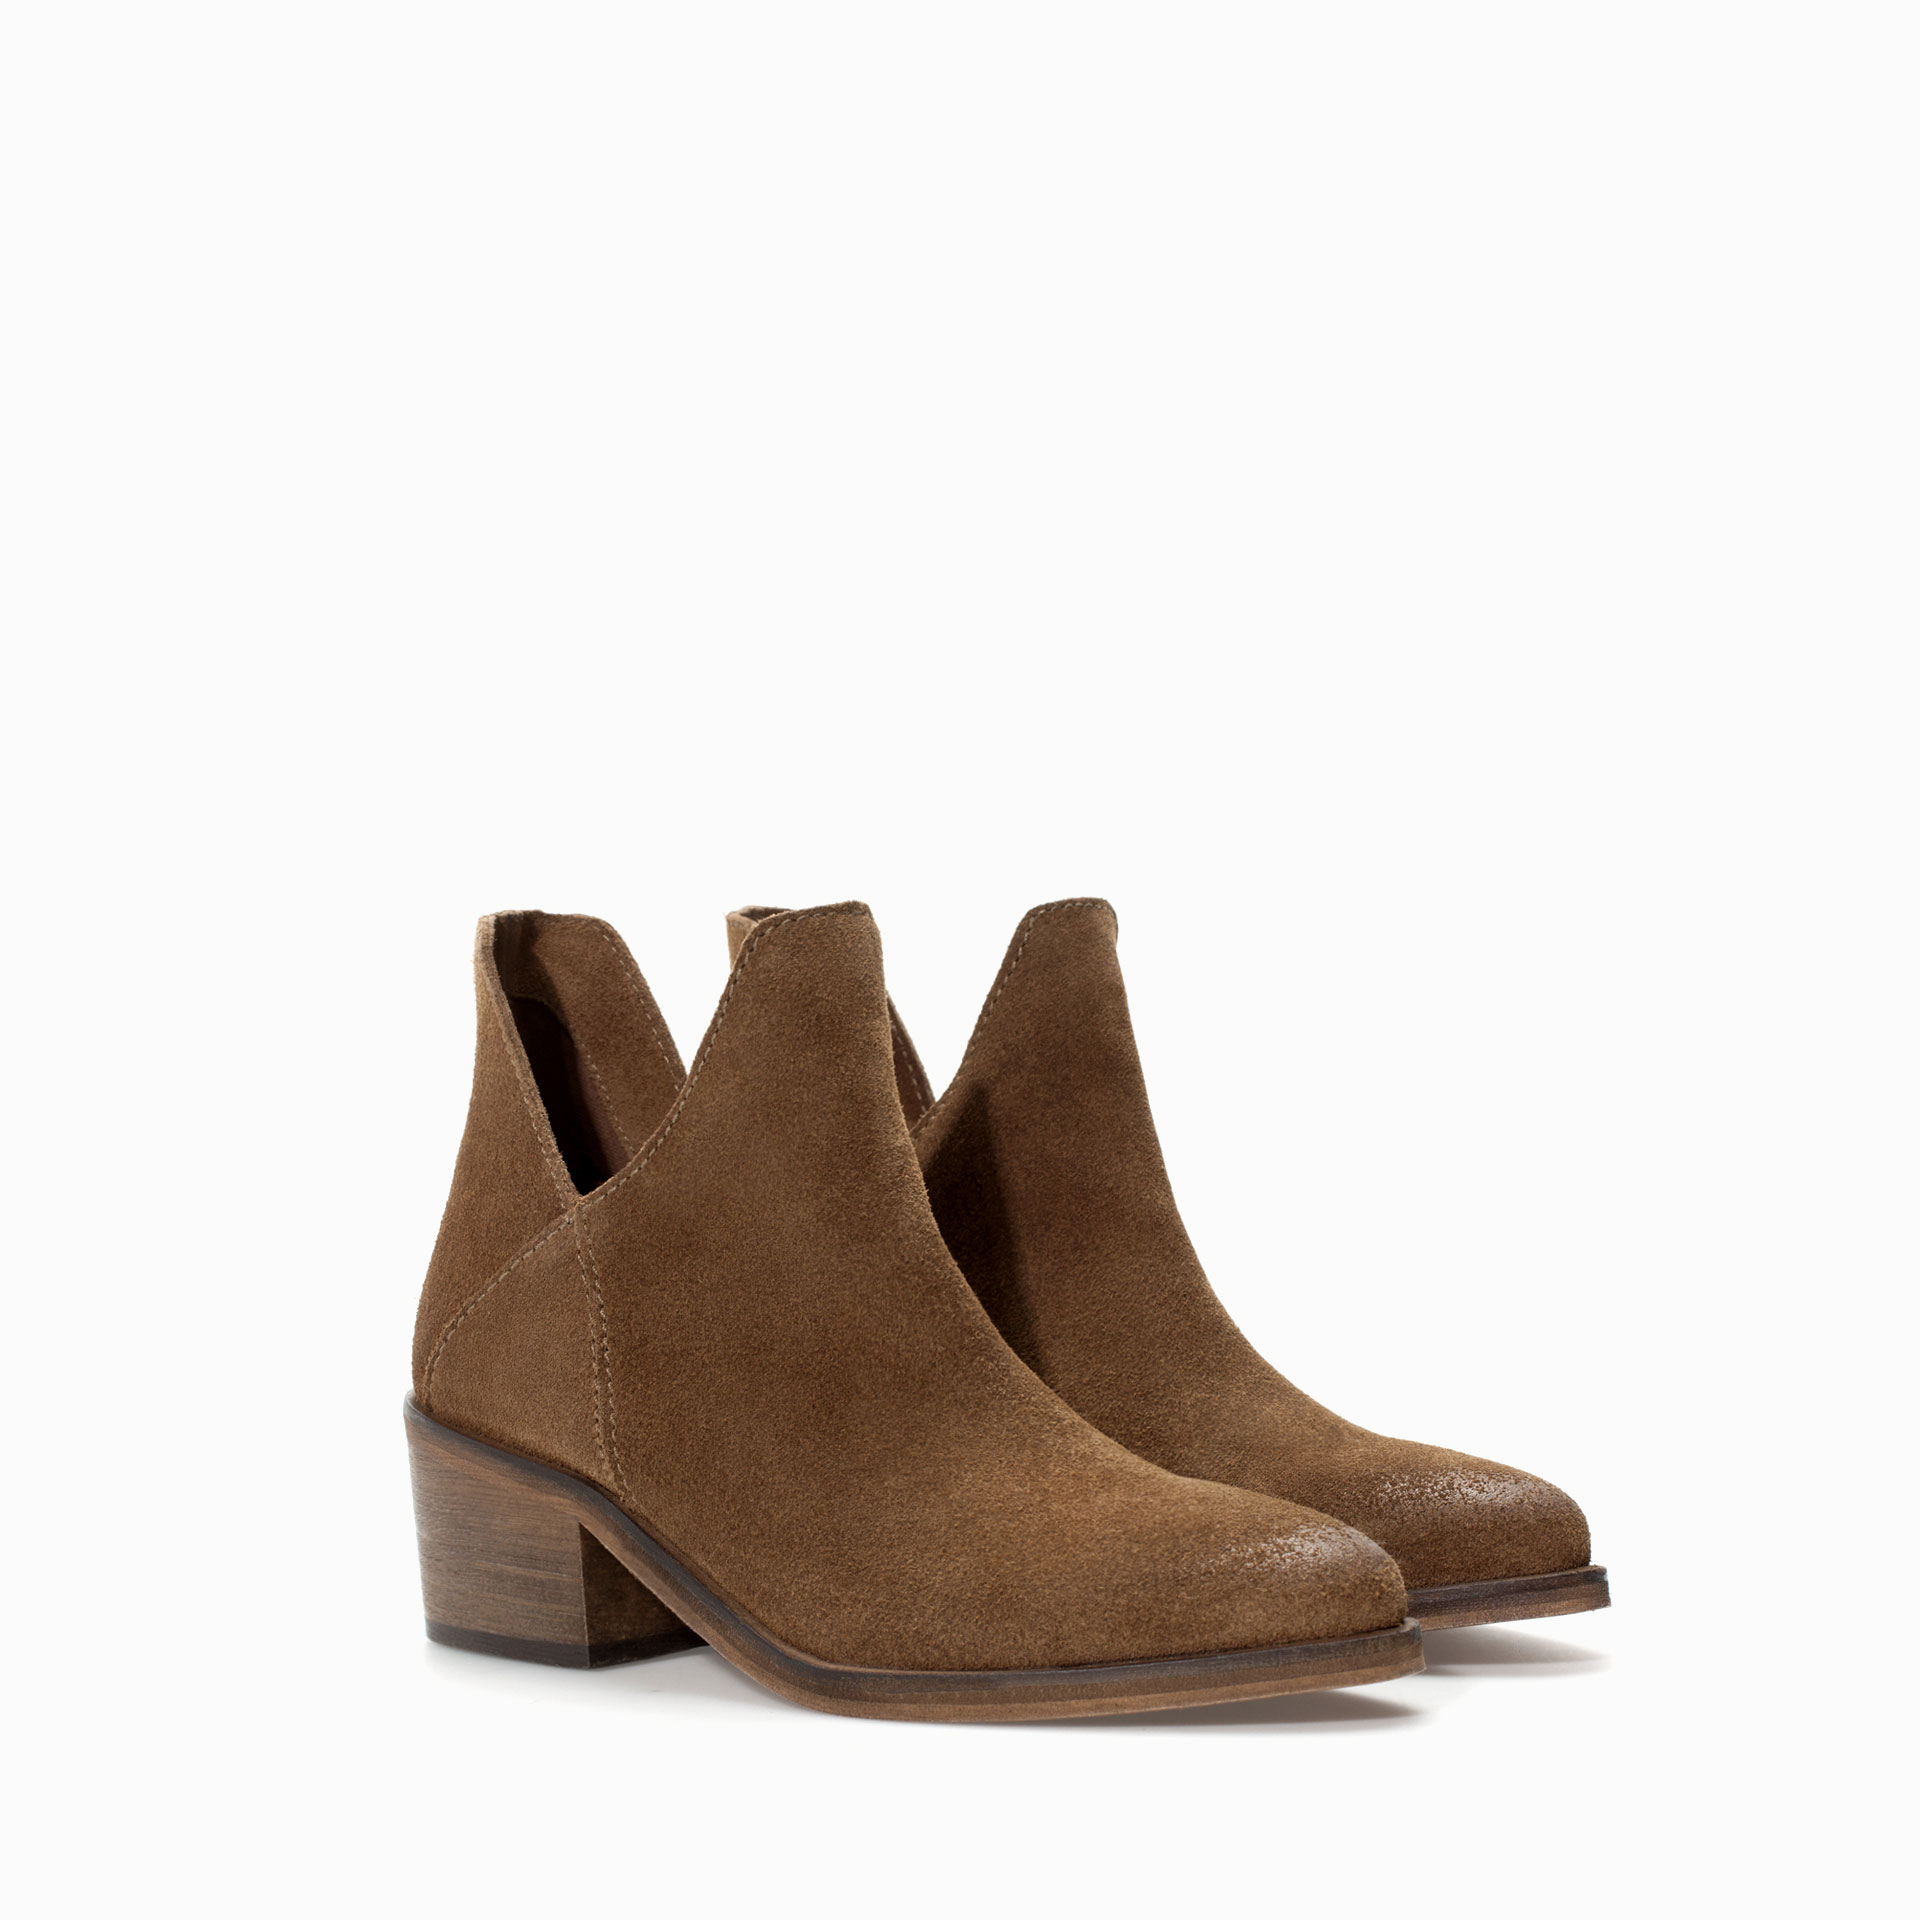 Zara Flat Hide Ankle Boot in Brown (Leather)